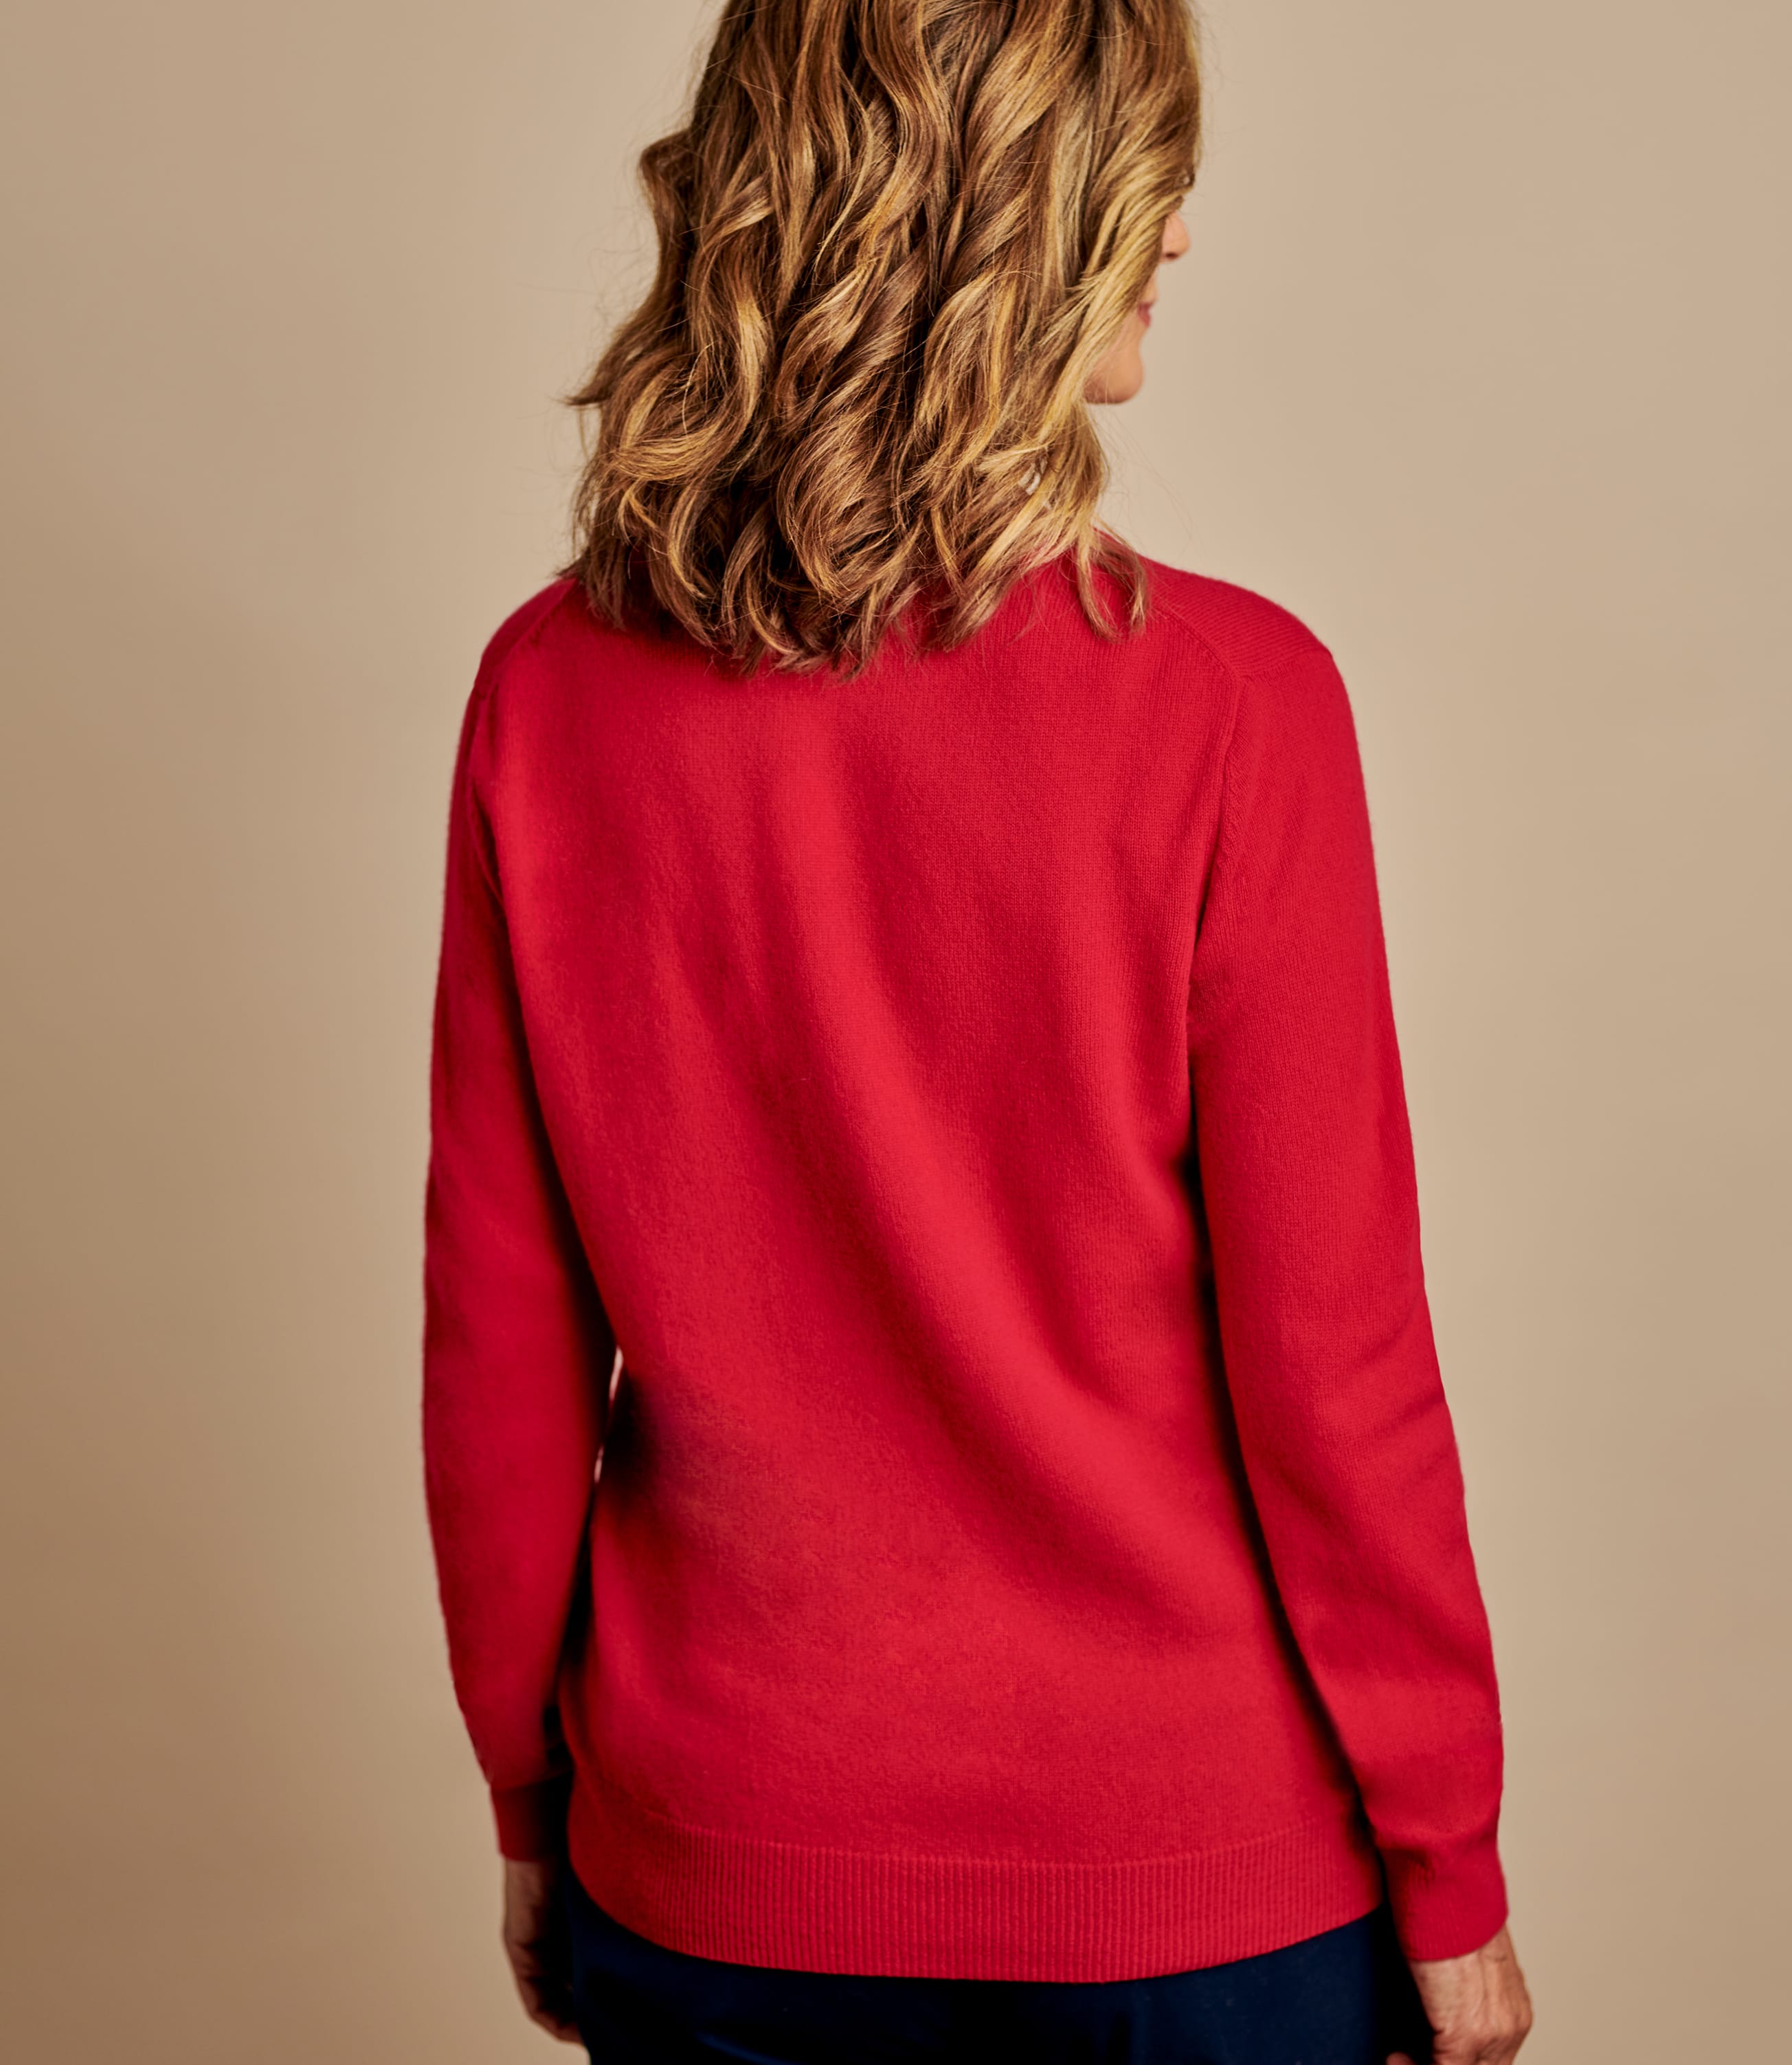 Cherry Cashmere & Merino Crew Neck Knitted Sweater WoolOvers US